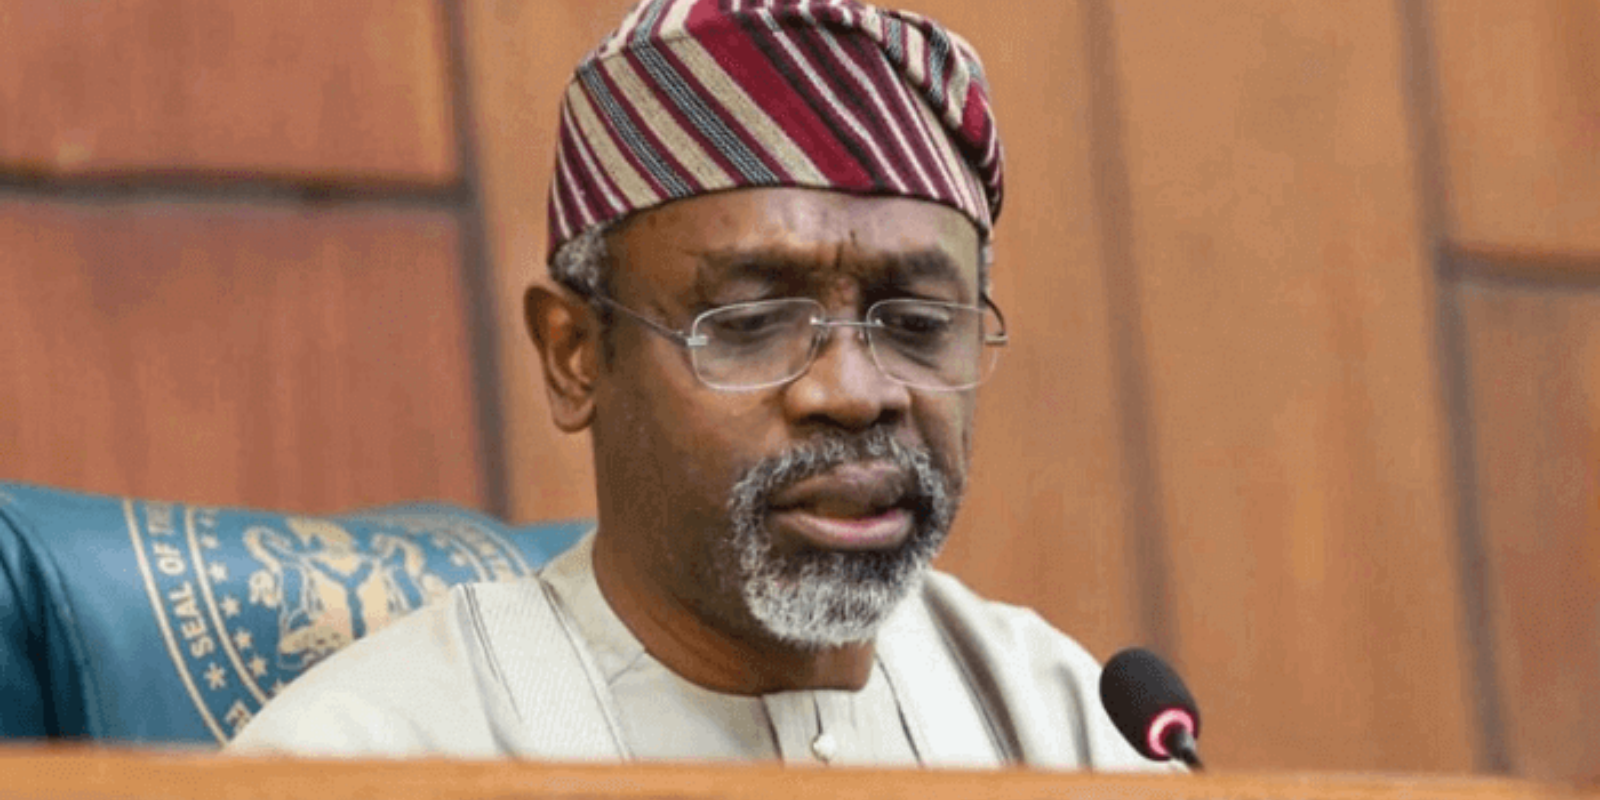 Femi Gbajabiamila was the governor of which state?